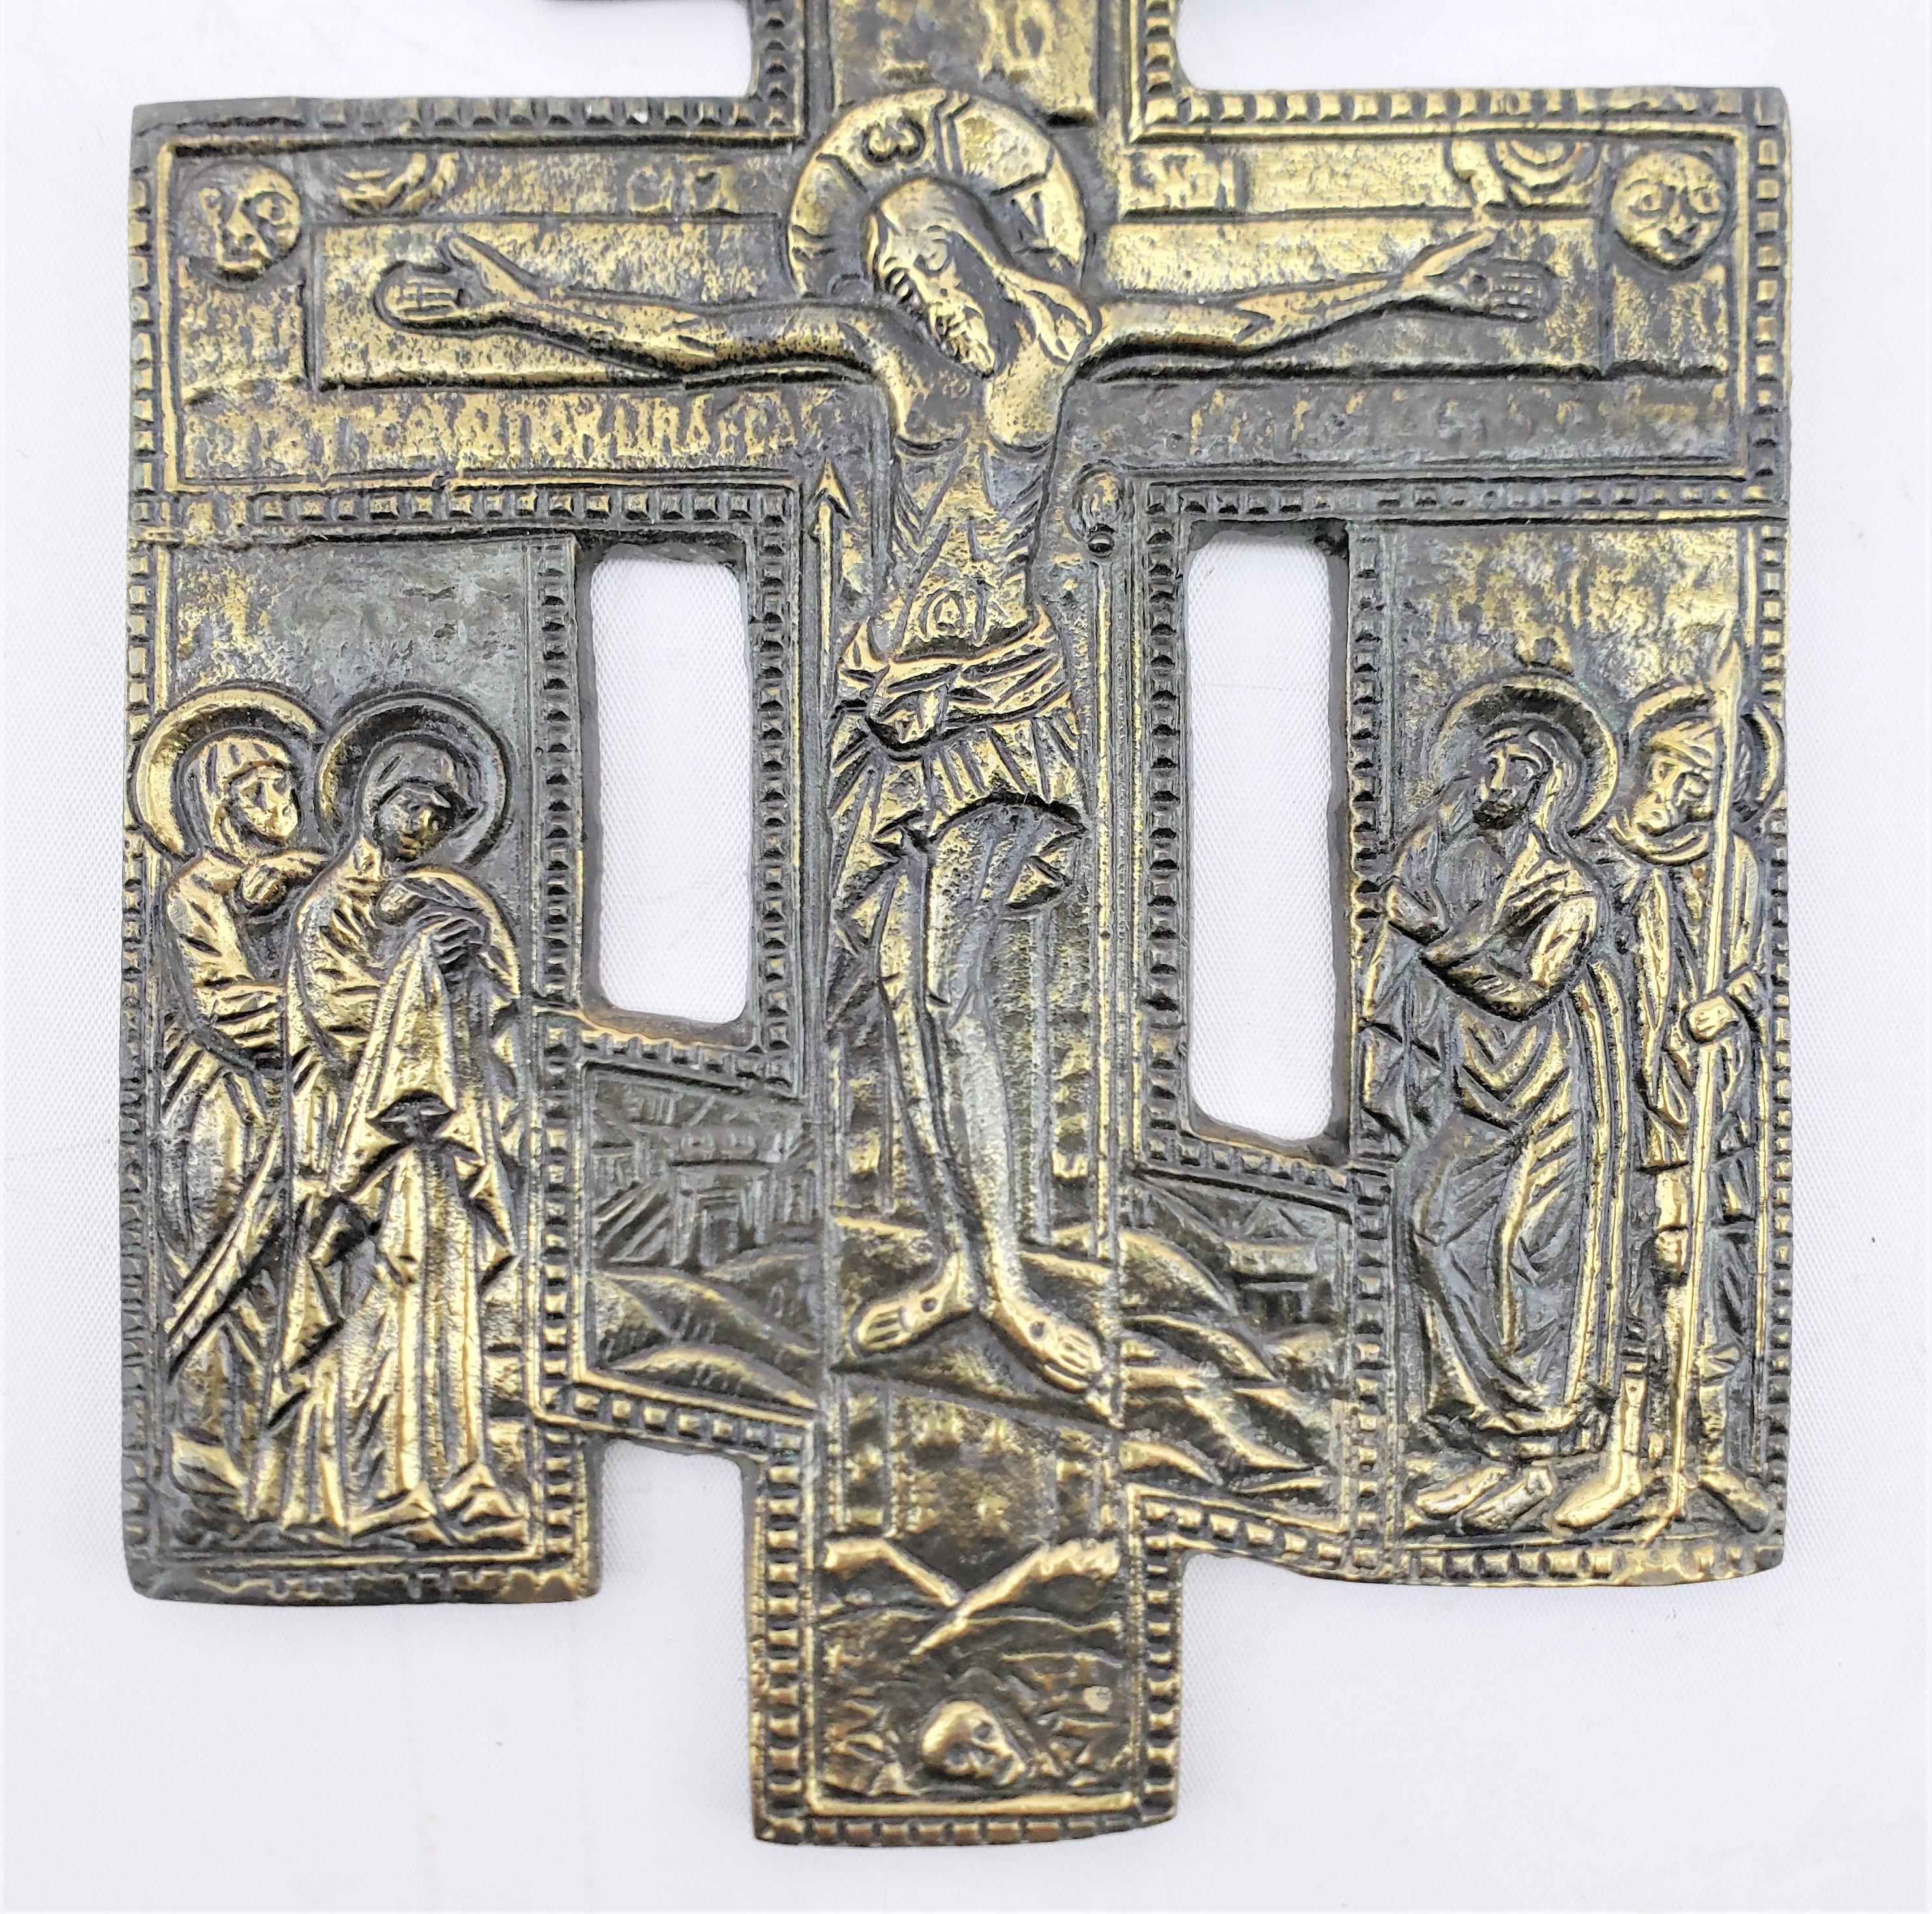 Art Deco Antique Cast Bronze Orthodox Christian Wall Mounted Icon, Cross or Crucifix For Sale